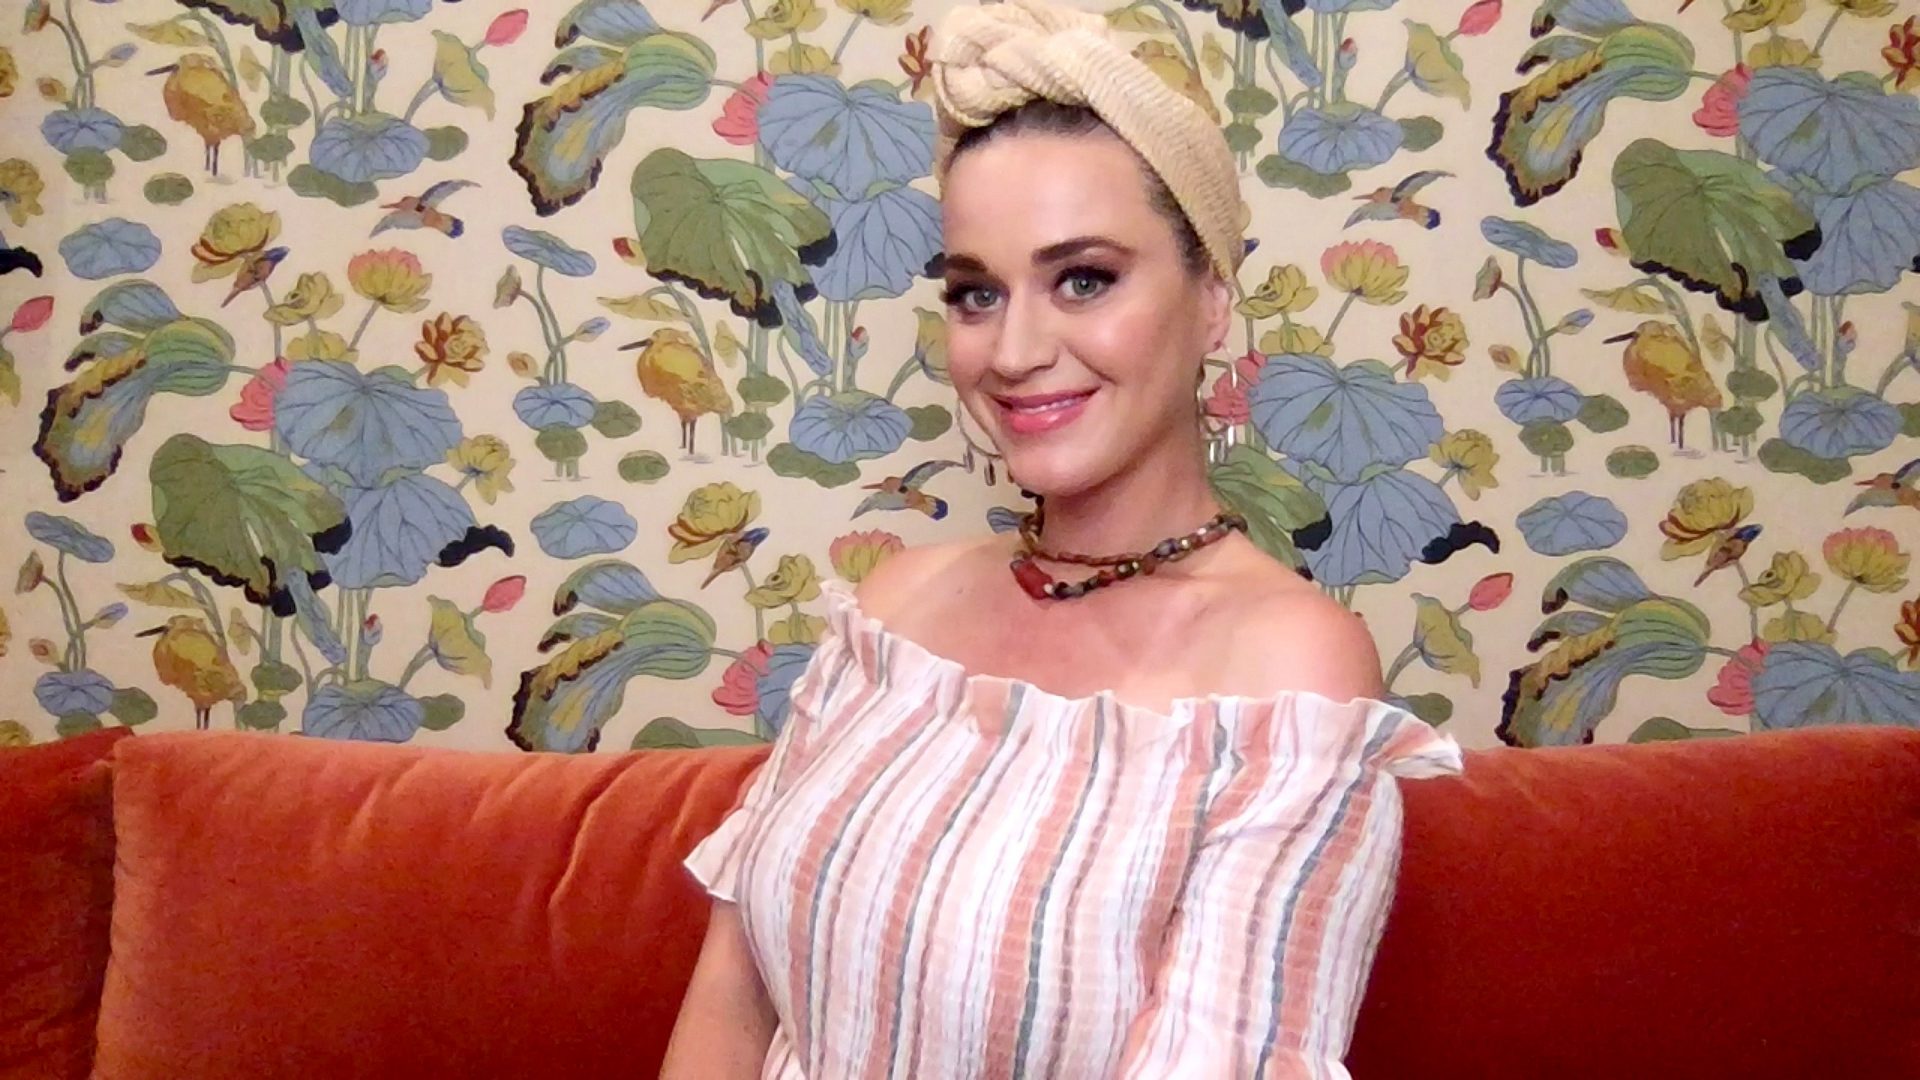 Katy Perry Opens Up About Being Pregnant All the way by a Pandemic